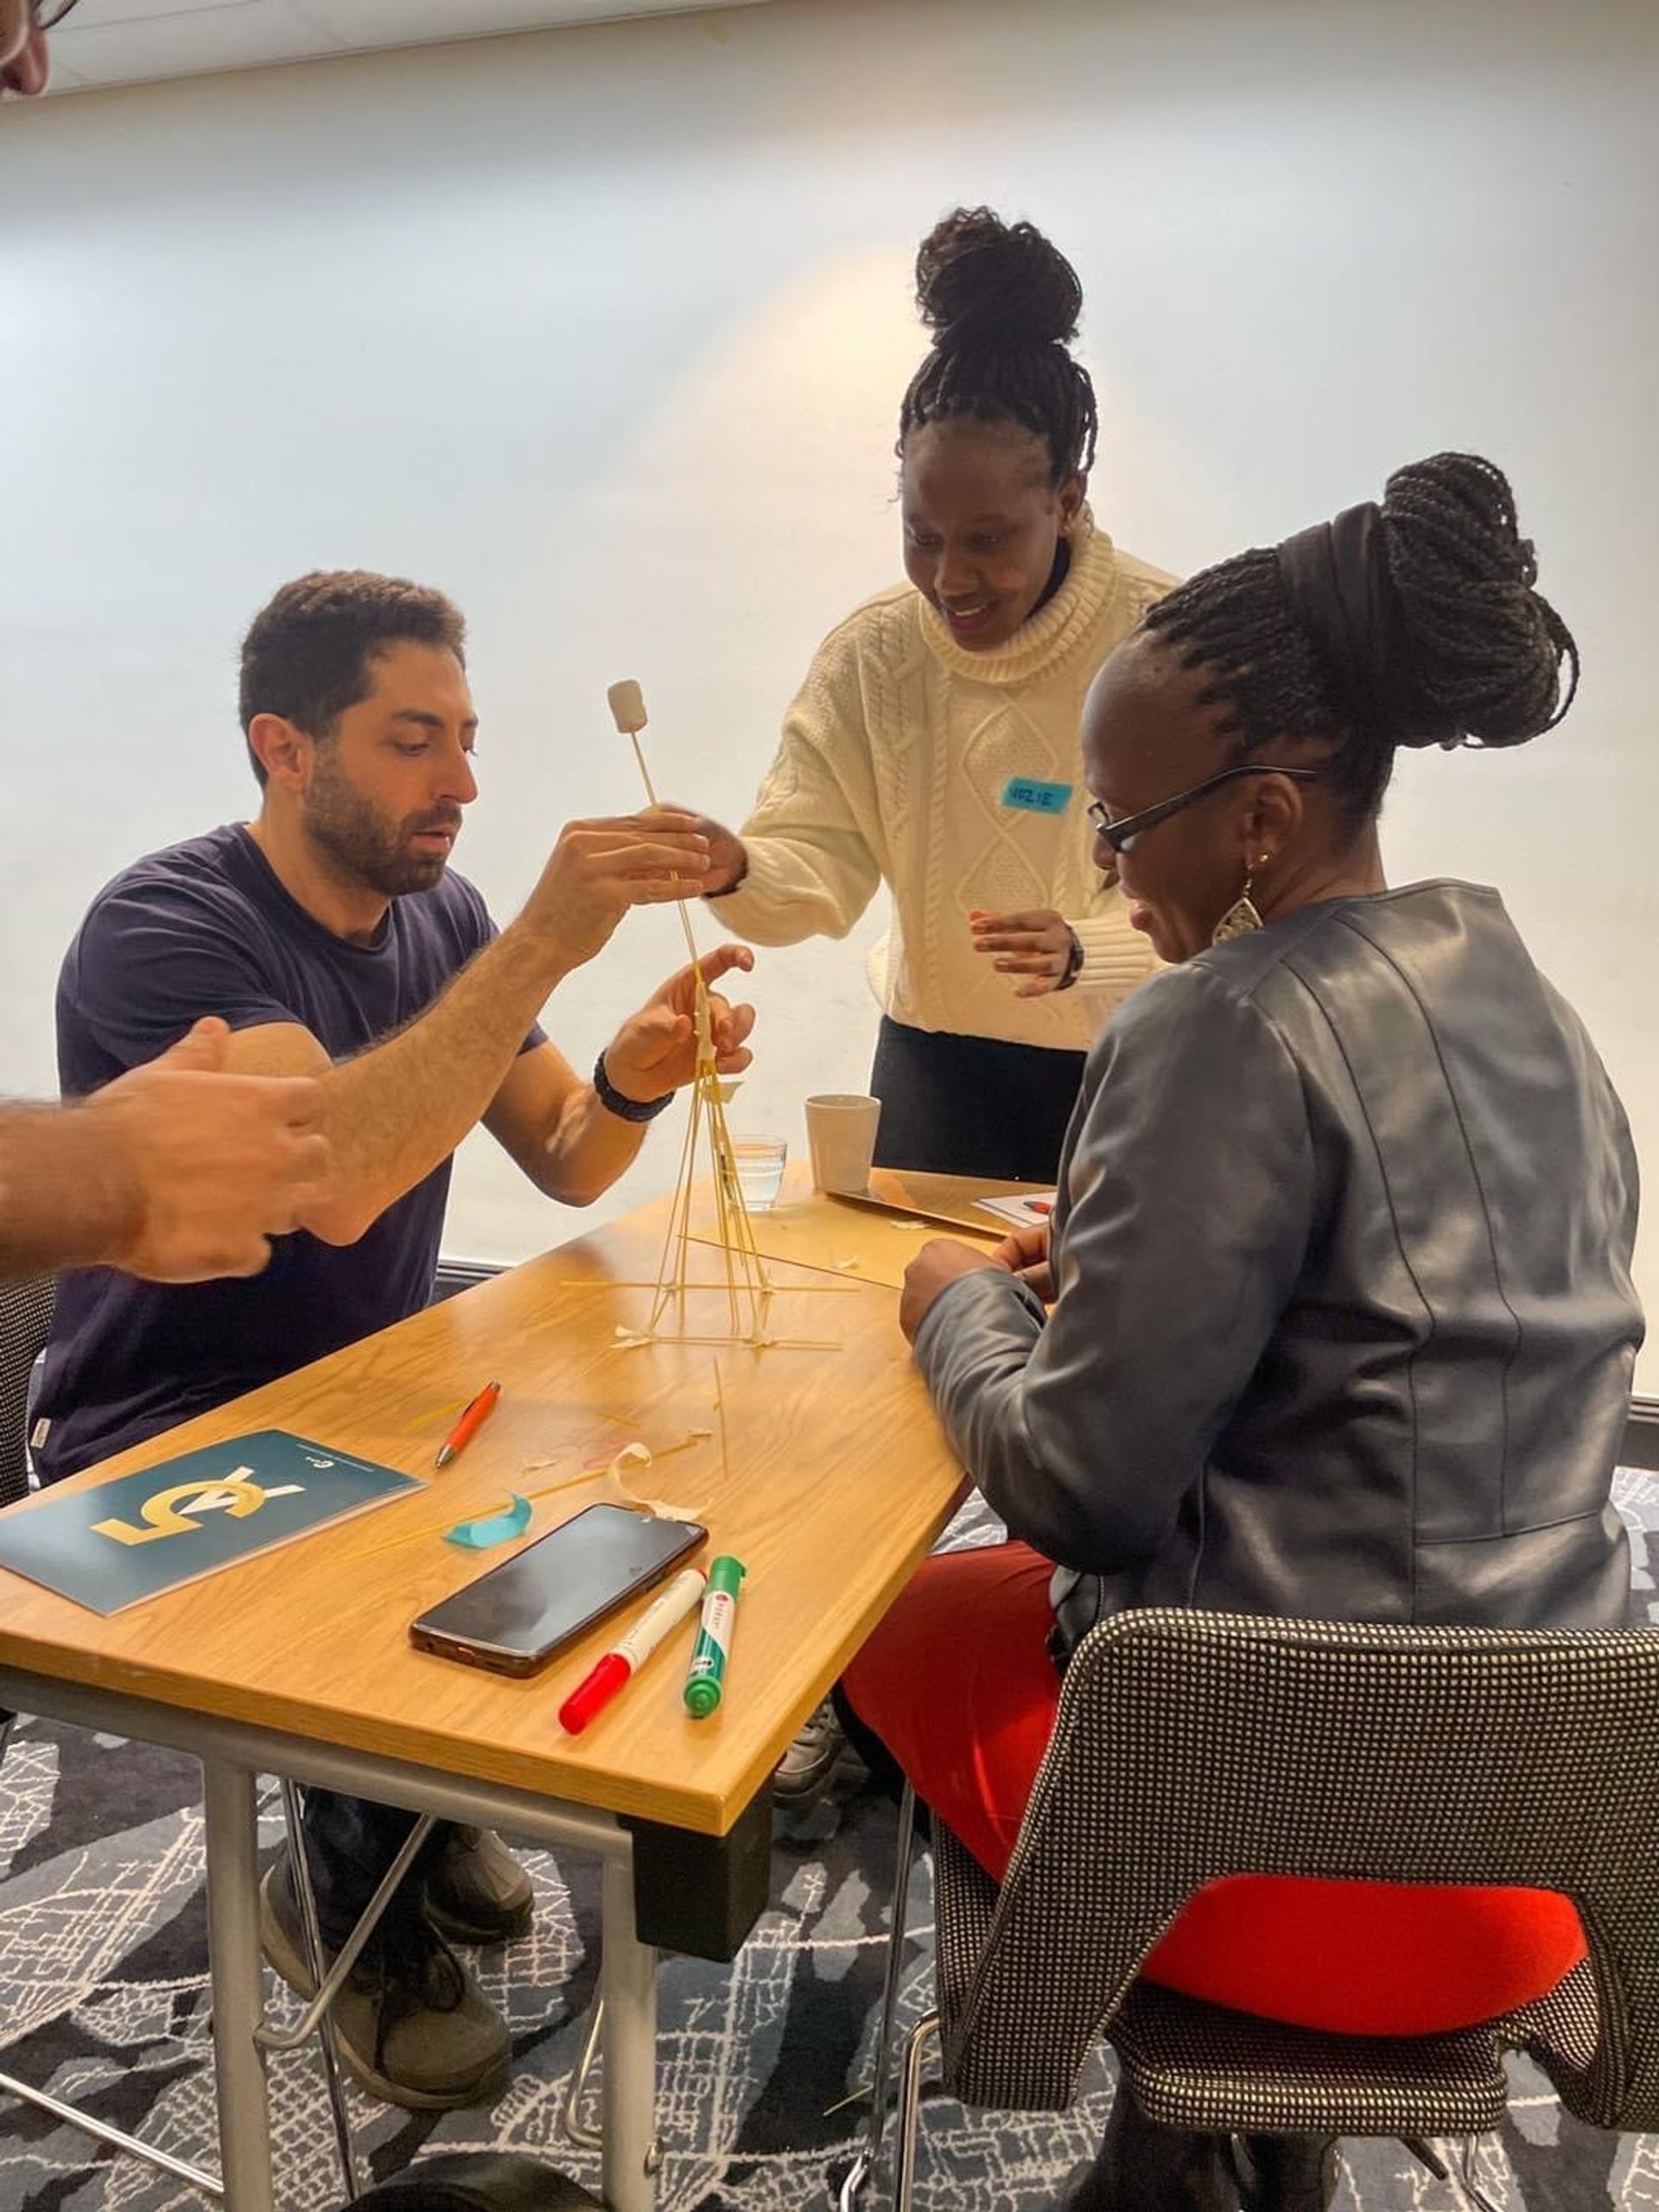 Doing the marshmallow challenge